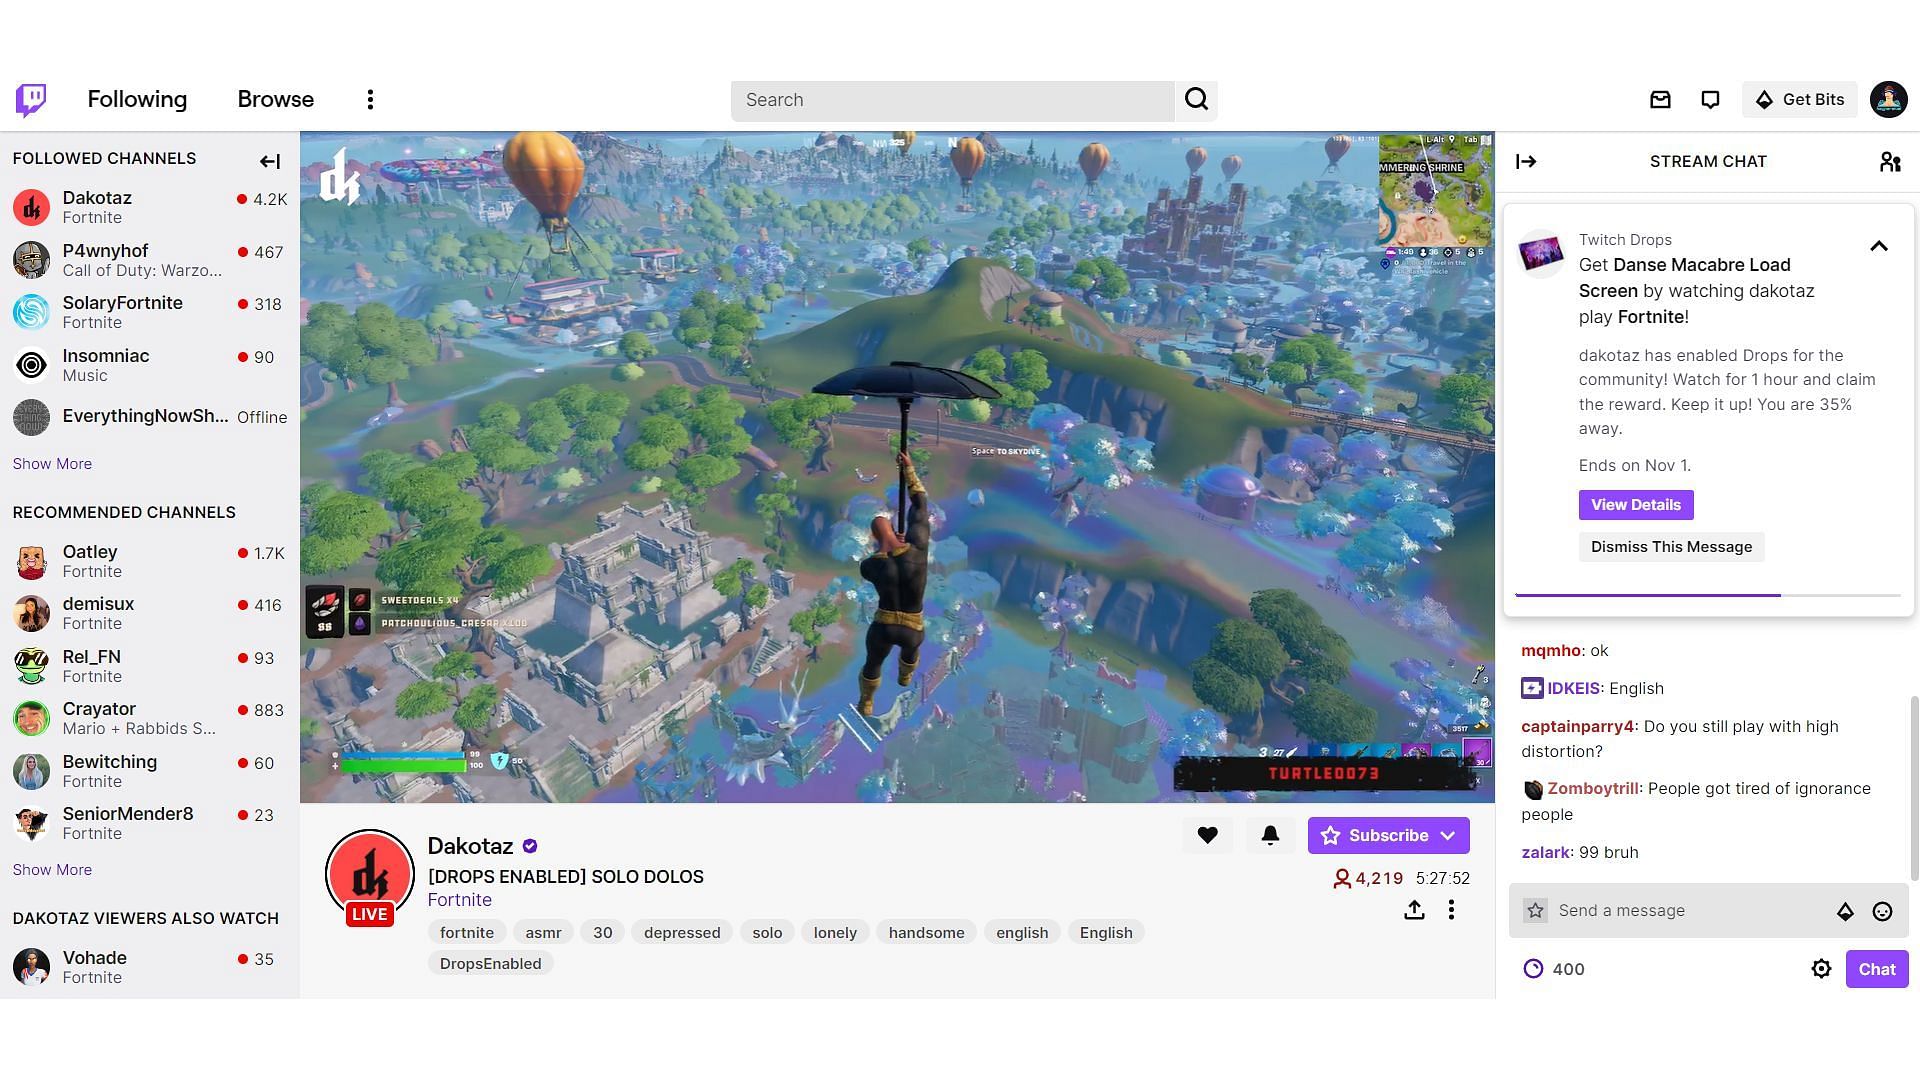 The drops enabled can be seen in the chat box (Image via Sportskeeda)